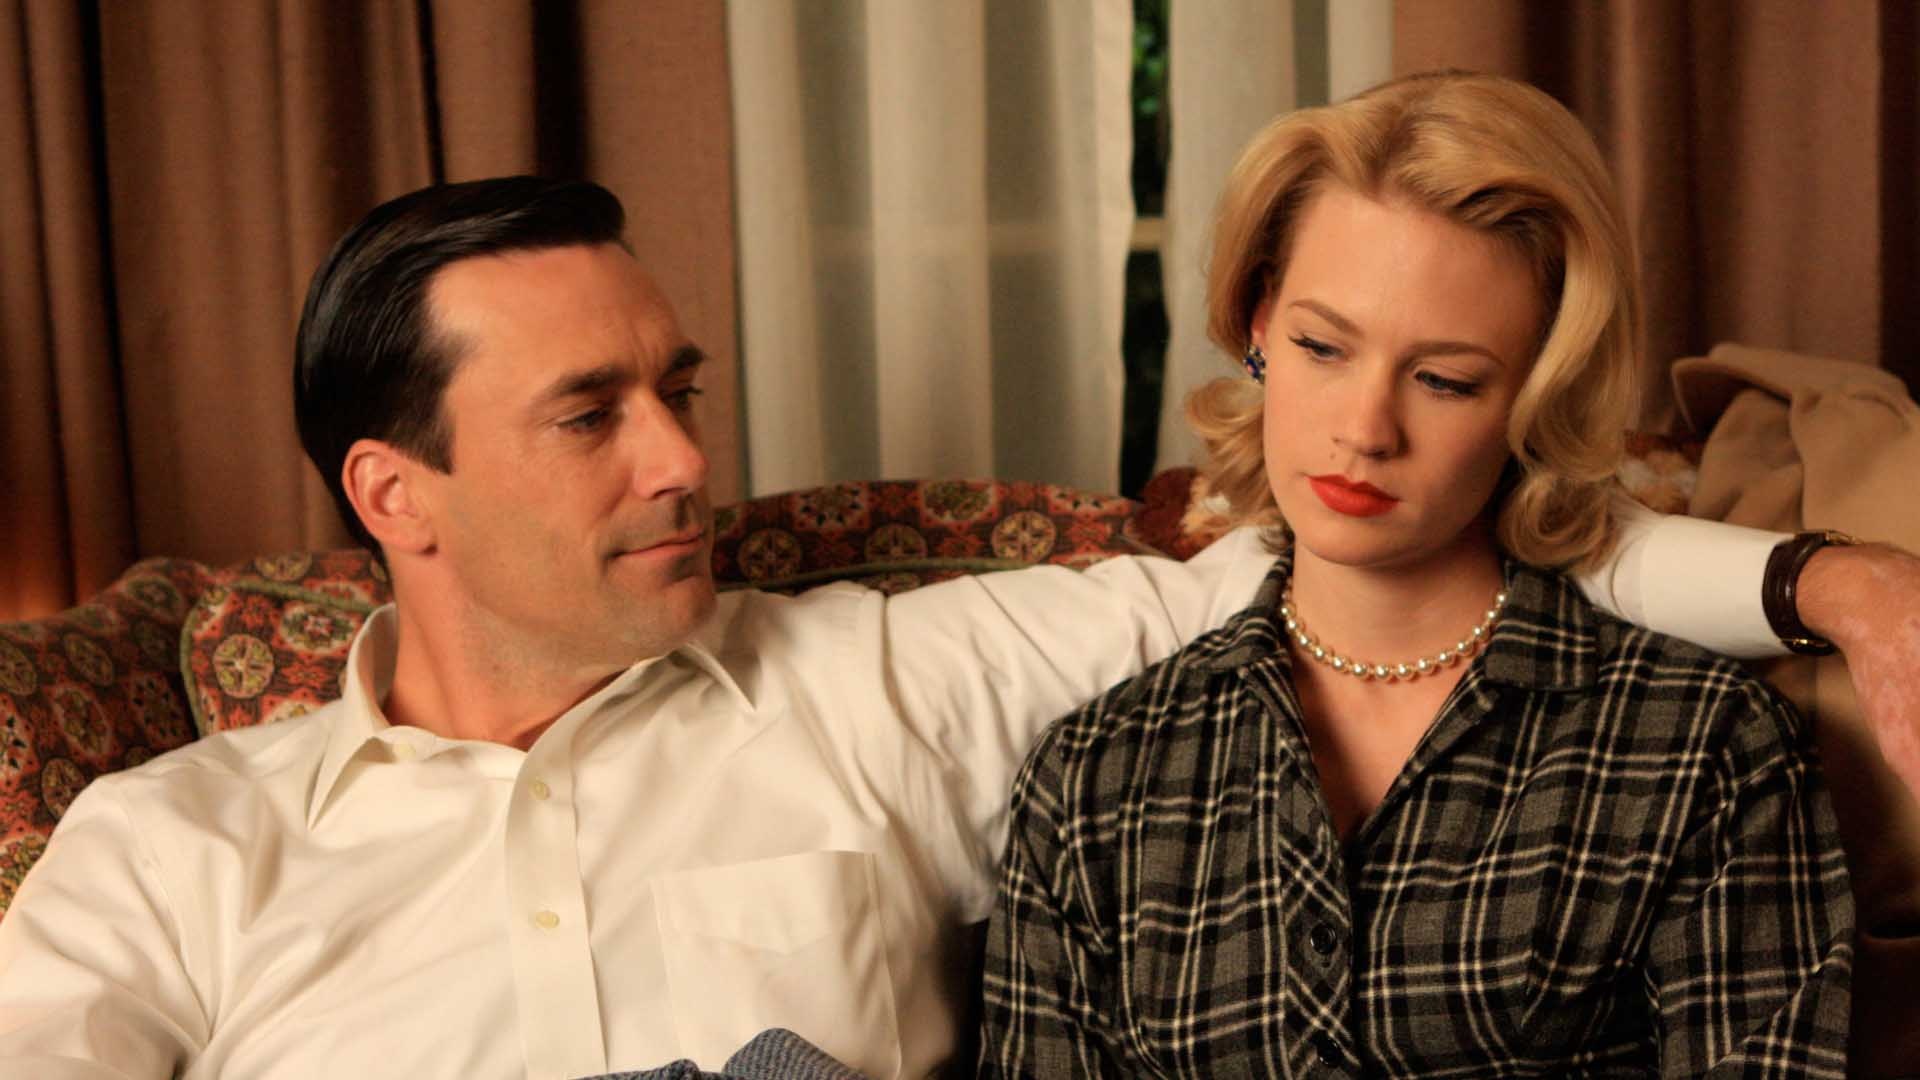 Mad Men (TV Series): Season 2, Episode 1, “For Those Who Think Young”. 1920x1080 Full HD Wallpaper.